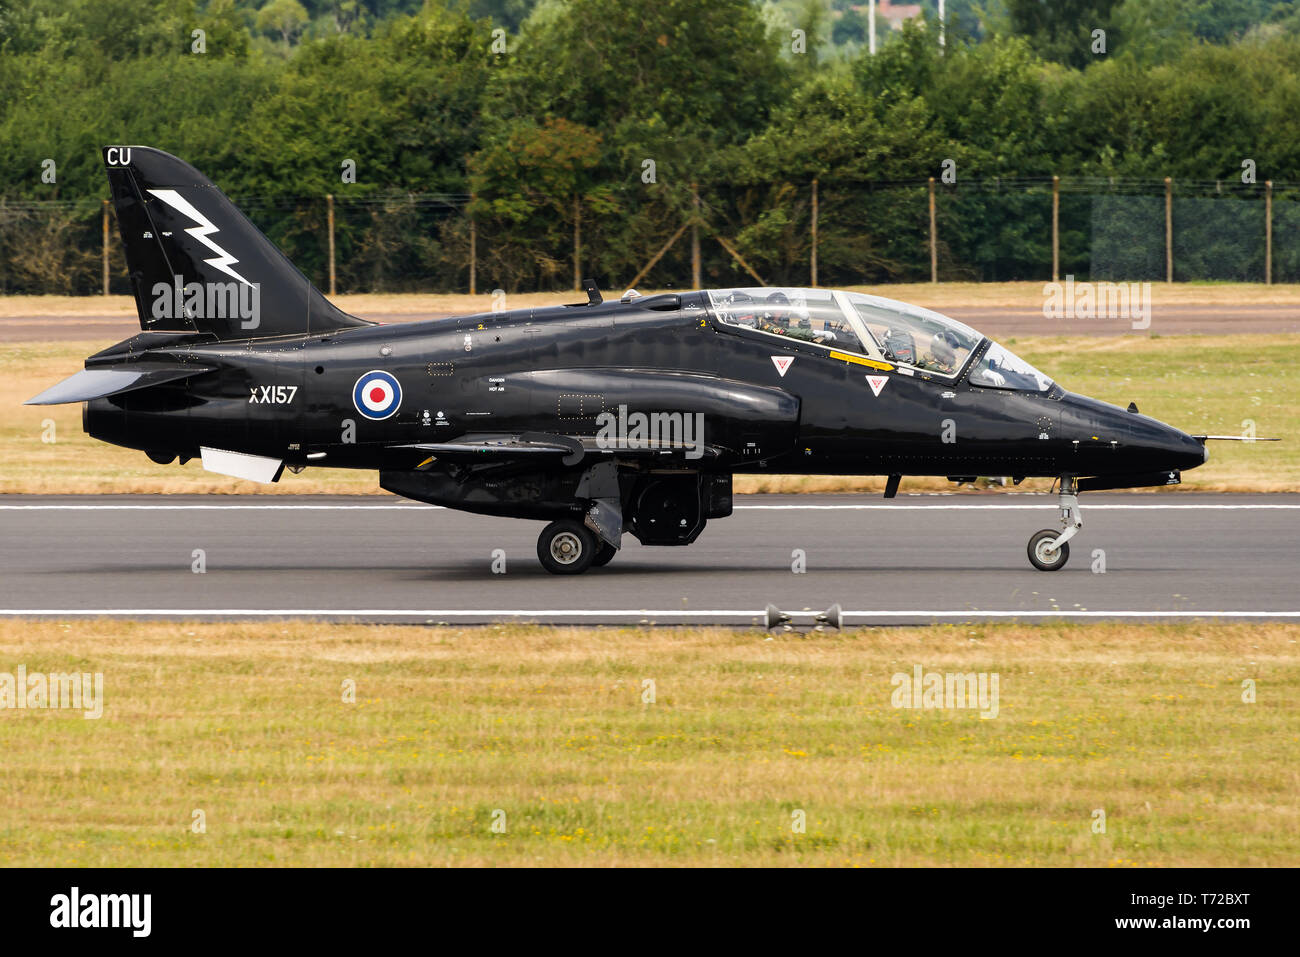 A BAE Systems Hawk single-engine advanced trainer aircraft of the Royal Air Force. Stock Photo